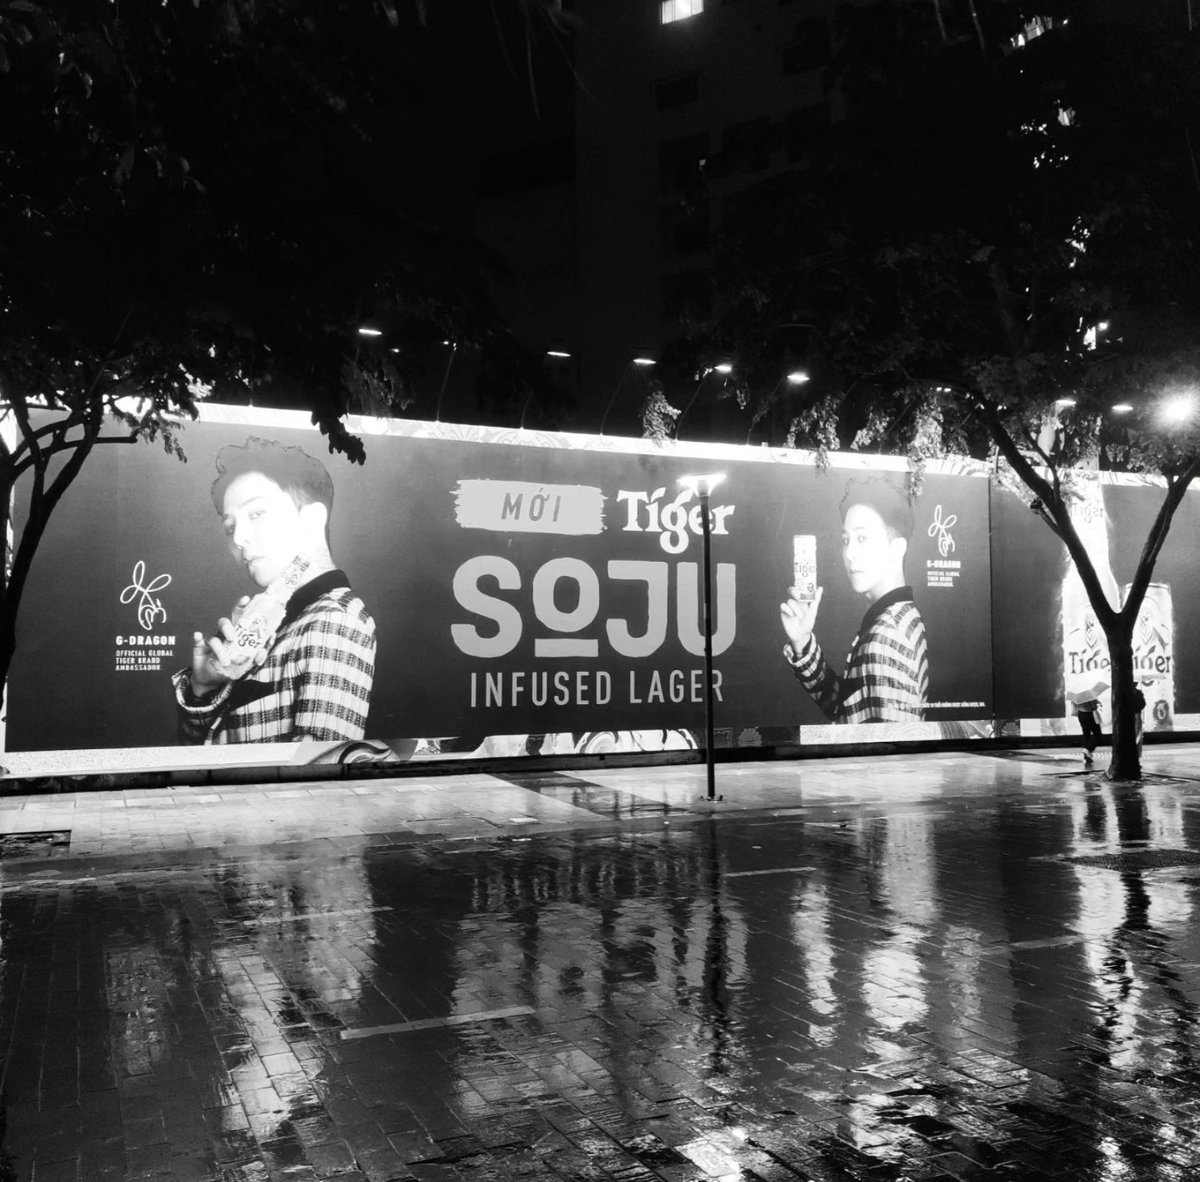 Another giant billboard of #GDRAGON x Tiger Beer #TigerSoju 😍
(By _young_viegga.01)